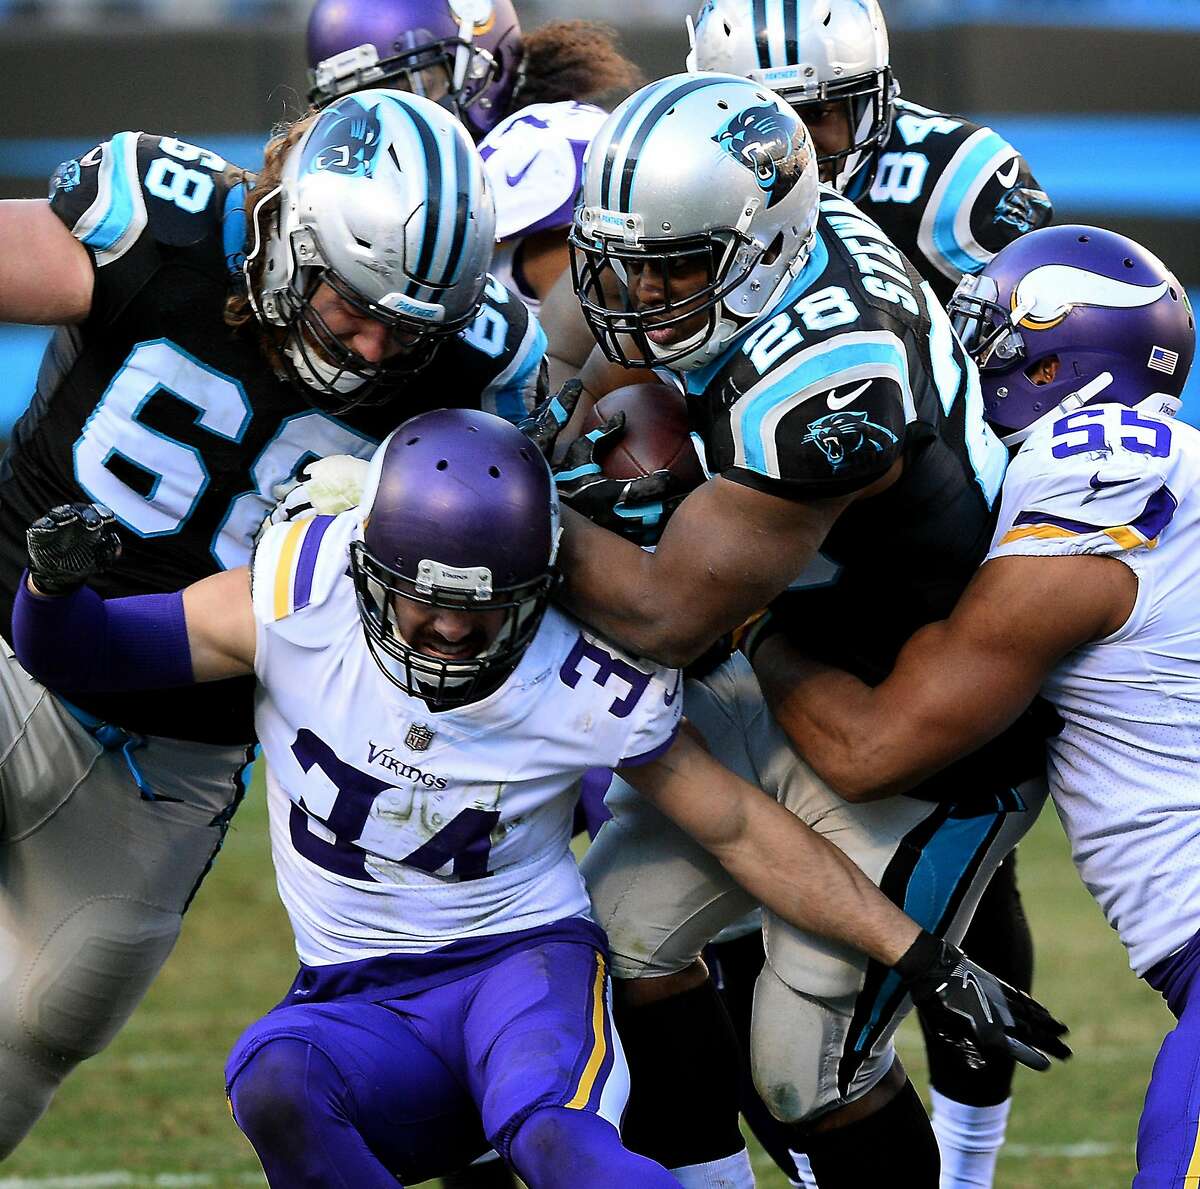 Carolina Panthers running back Jonathan Stewart, center/right, keeps pushing forward on a run as Minnesota Vikings safety Andrew Sendejo, left, and linebacker Anthony Barr, right, try to make the stop during fourth quarter action on Sunday, Dec. 10, 2017 at Bank of America Stadium in Charlotte, N.C. The Panthers defeated the Vikings 31-24. (Jeff Siner/Charlotte Observer/TNS)